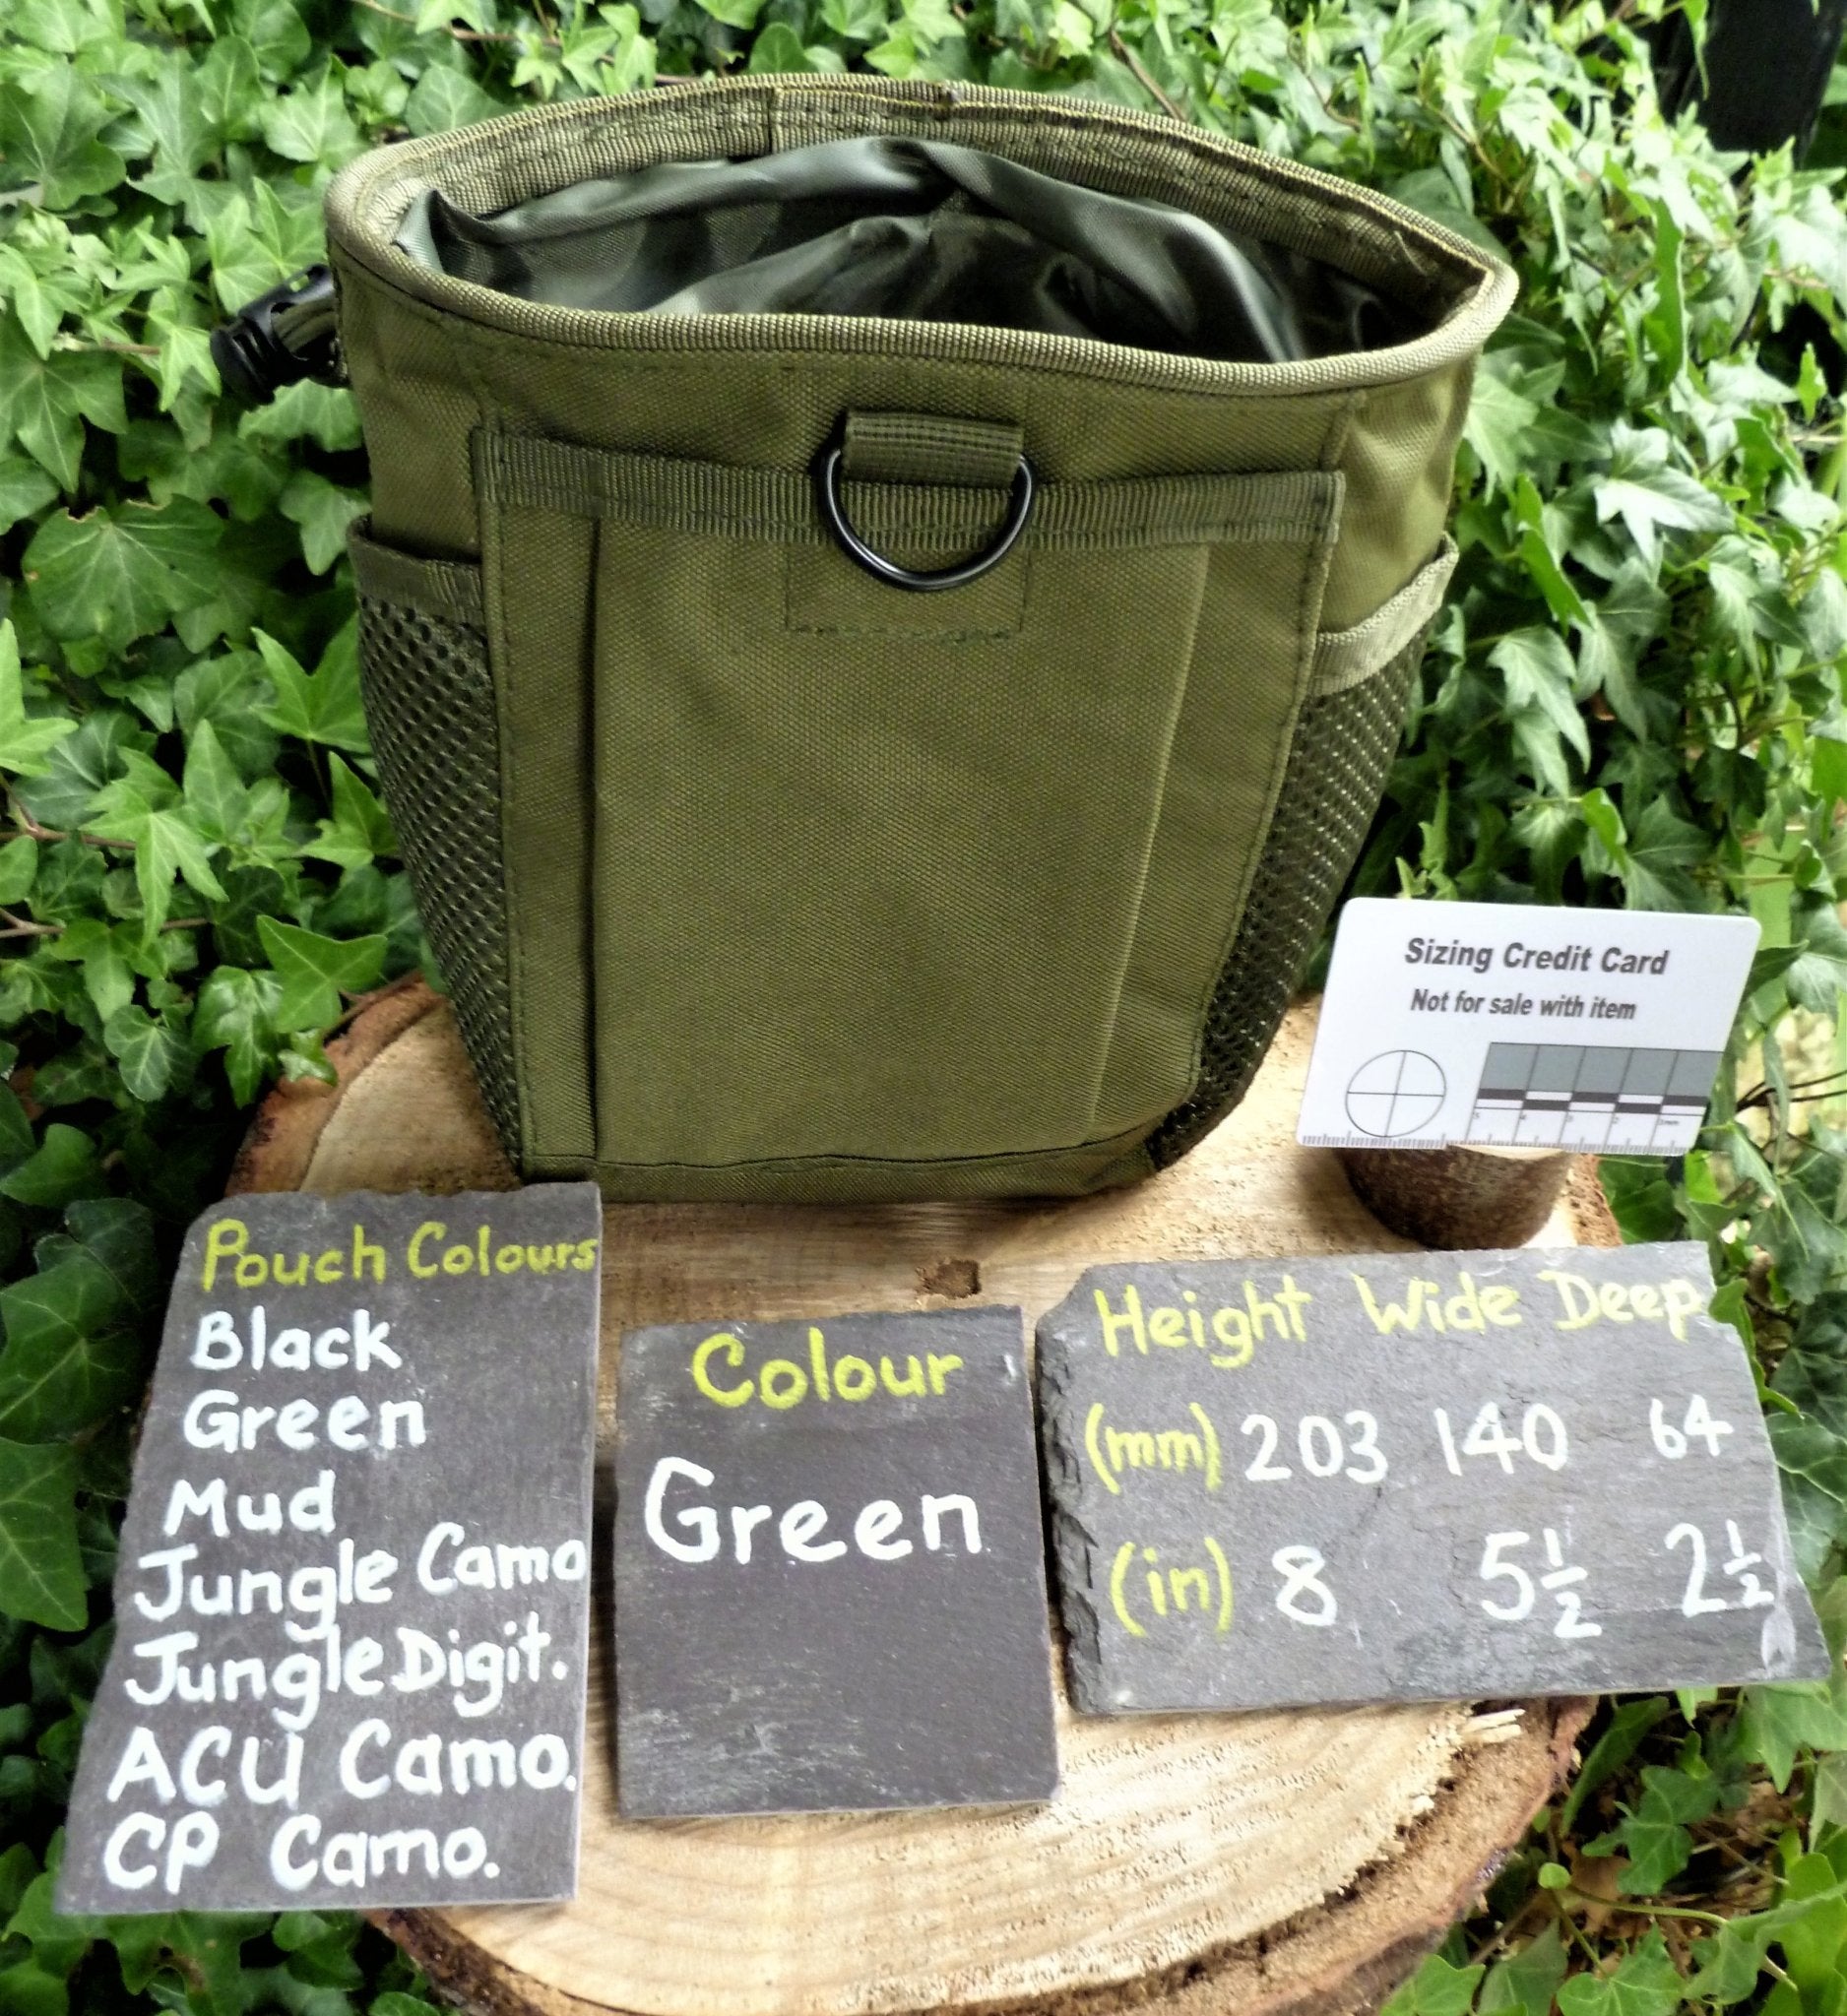 Foraging Pouches, Metal detecting or Paintball Foraging Pouch Huggins Attic Green   [Huggins attic]